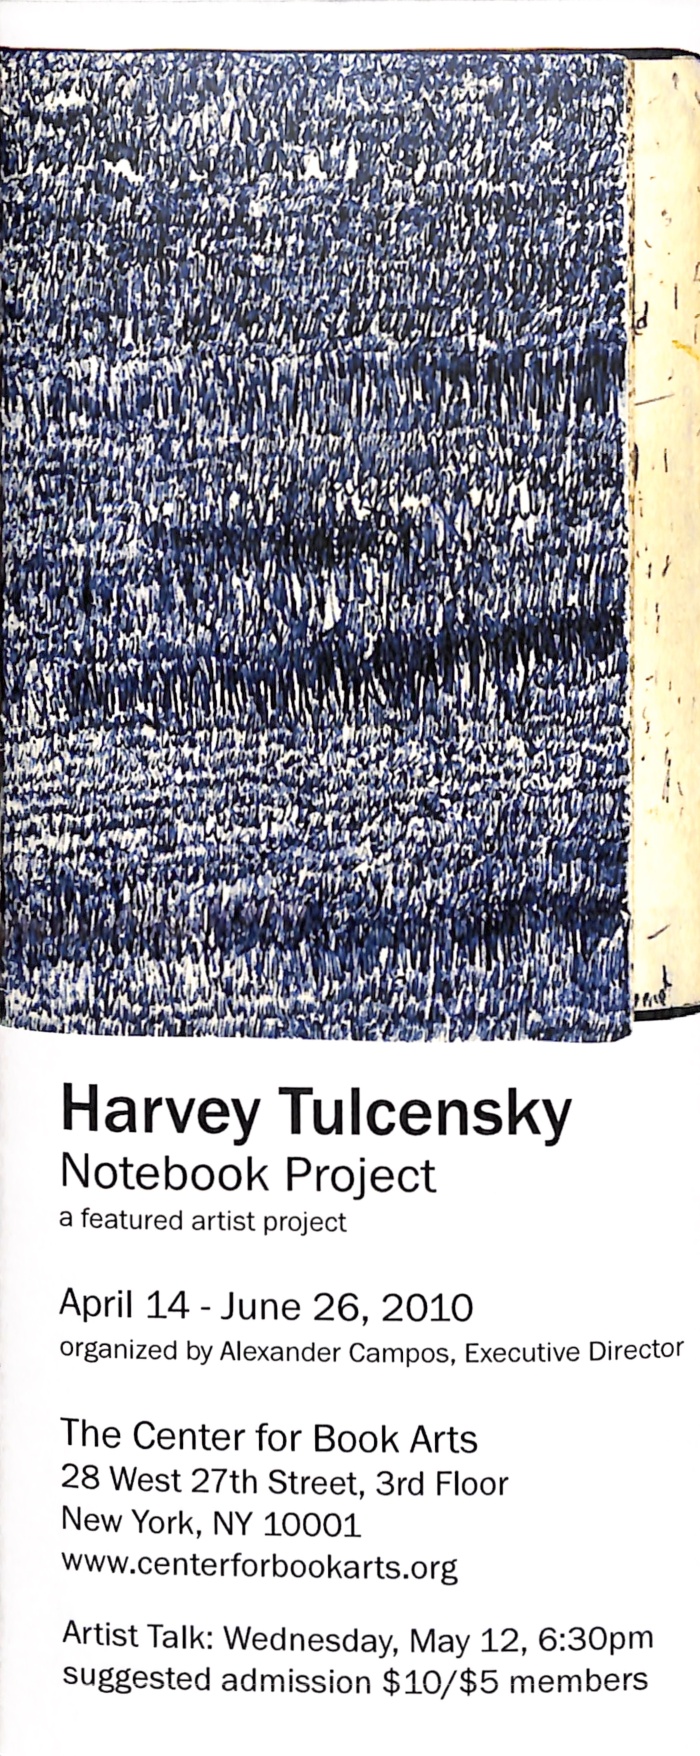 [Exhibition brochure for "Notebook Project: Harvey Tulcensky"]